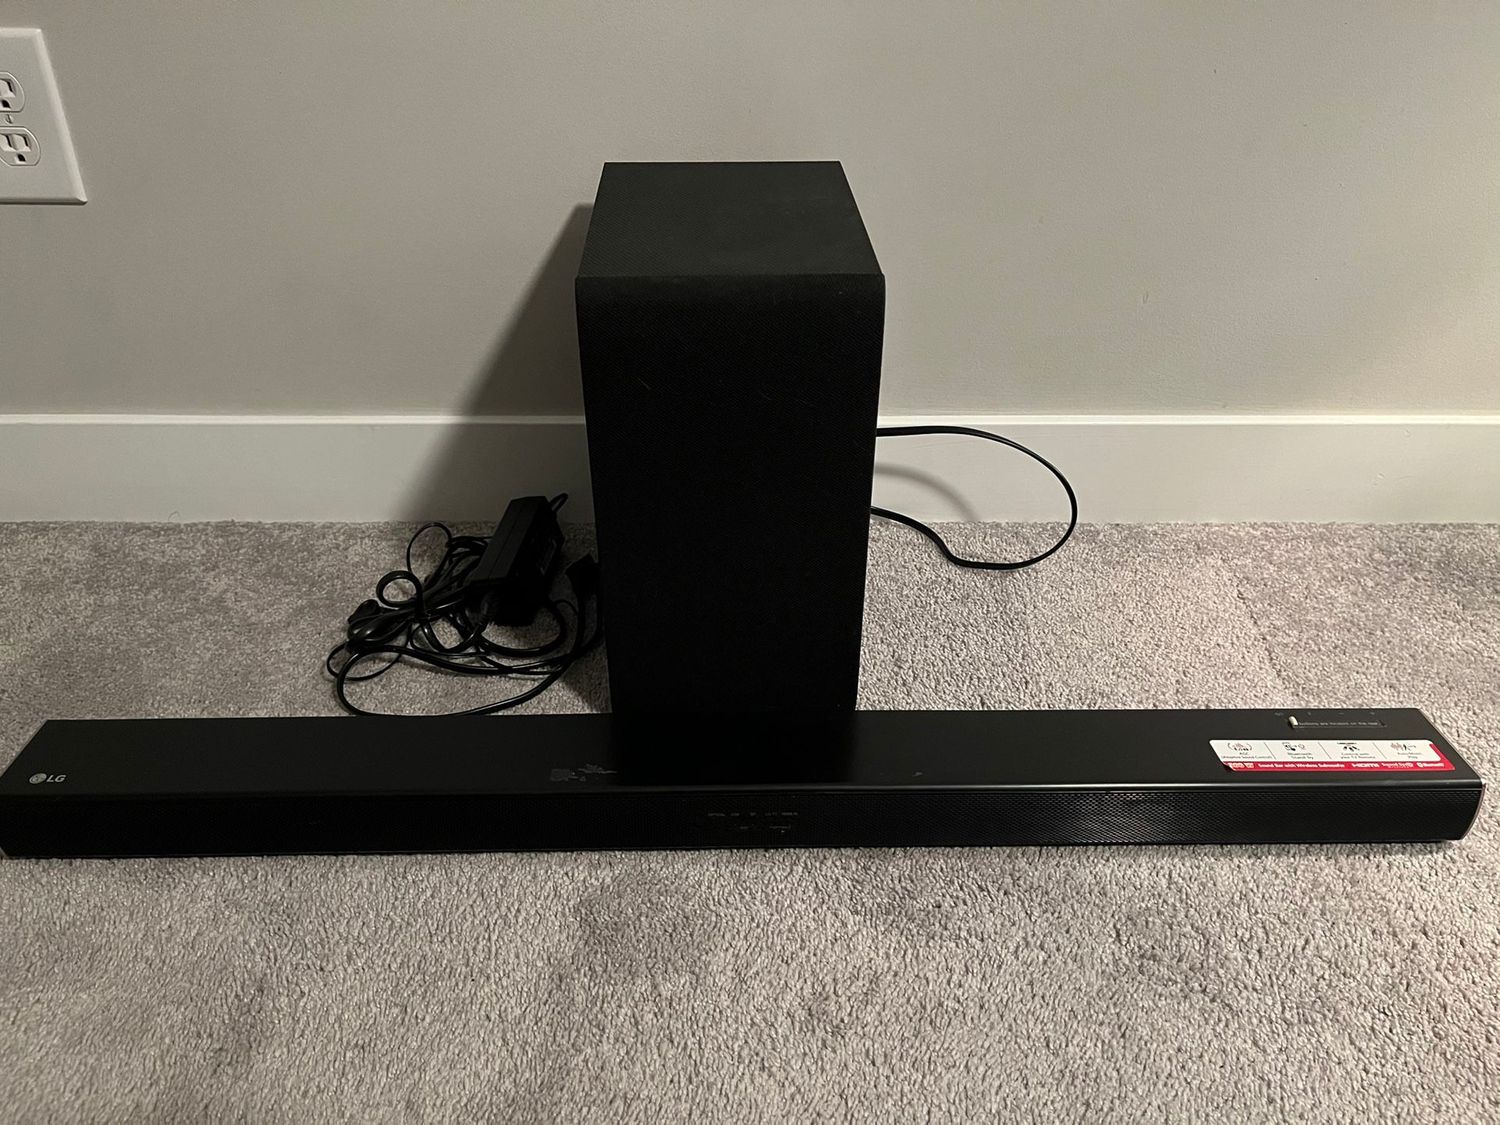 How To Pair LG Sh4 Sound Bar With Bluetooth Headphones